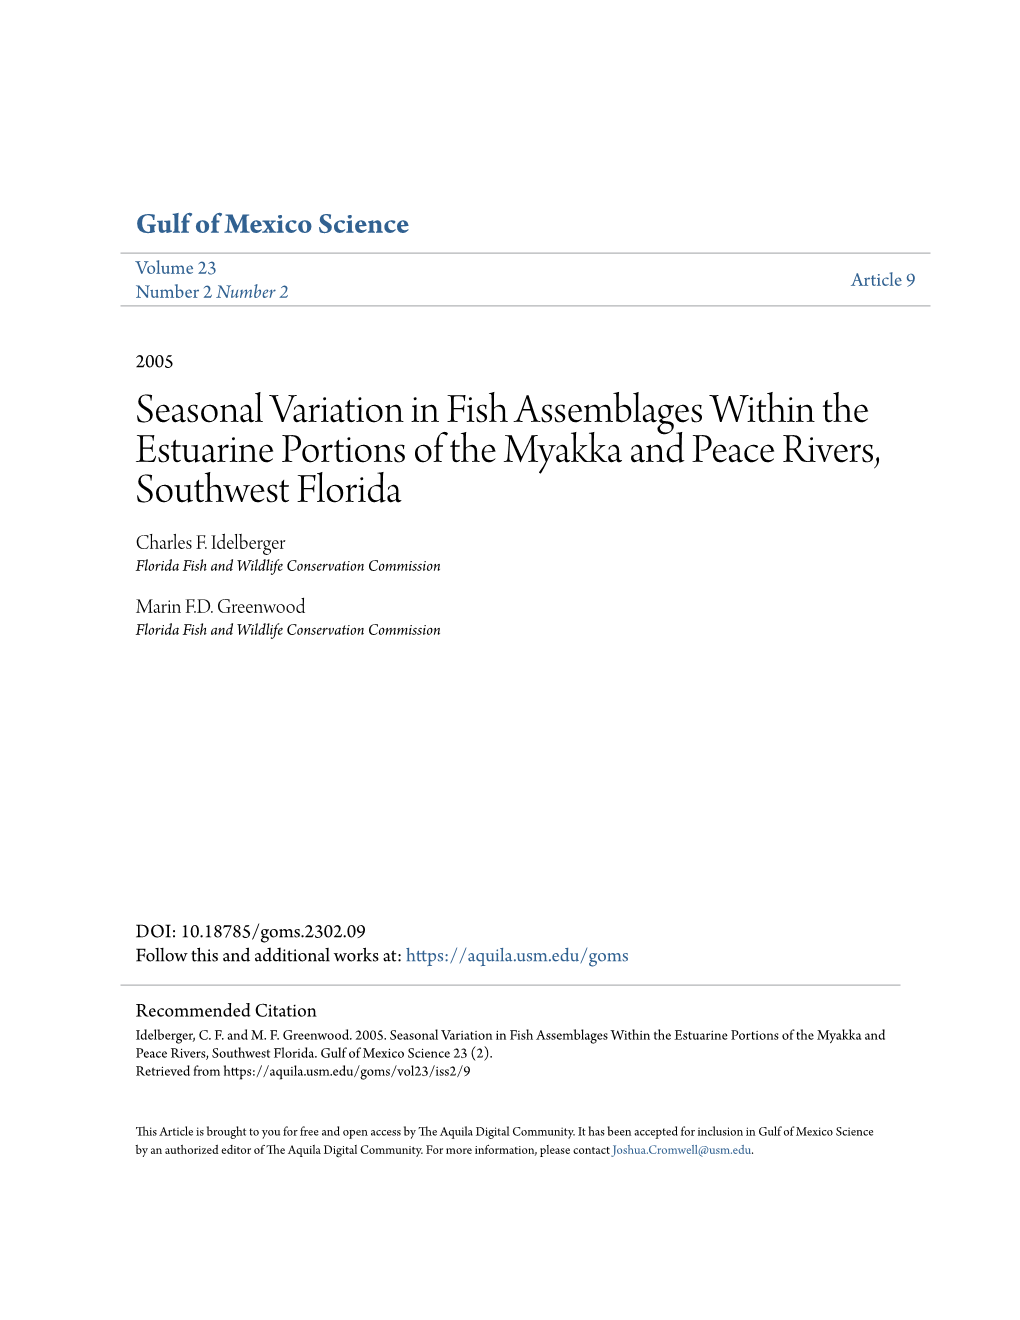 Seasonal Variation in Fish Assemblages Within the Estuarine Portions of the Myakka and Peace Rivers, Southwest Florida Charles F